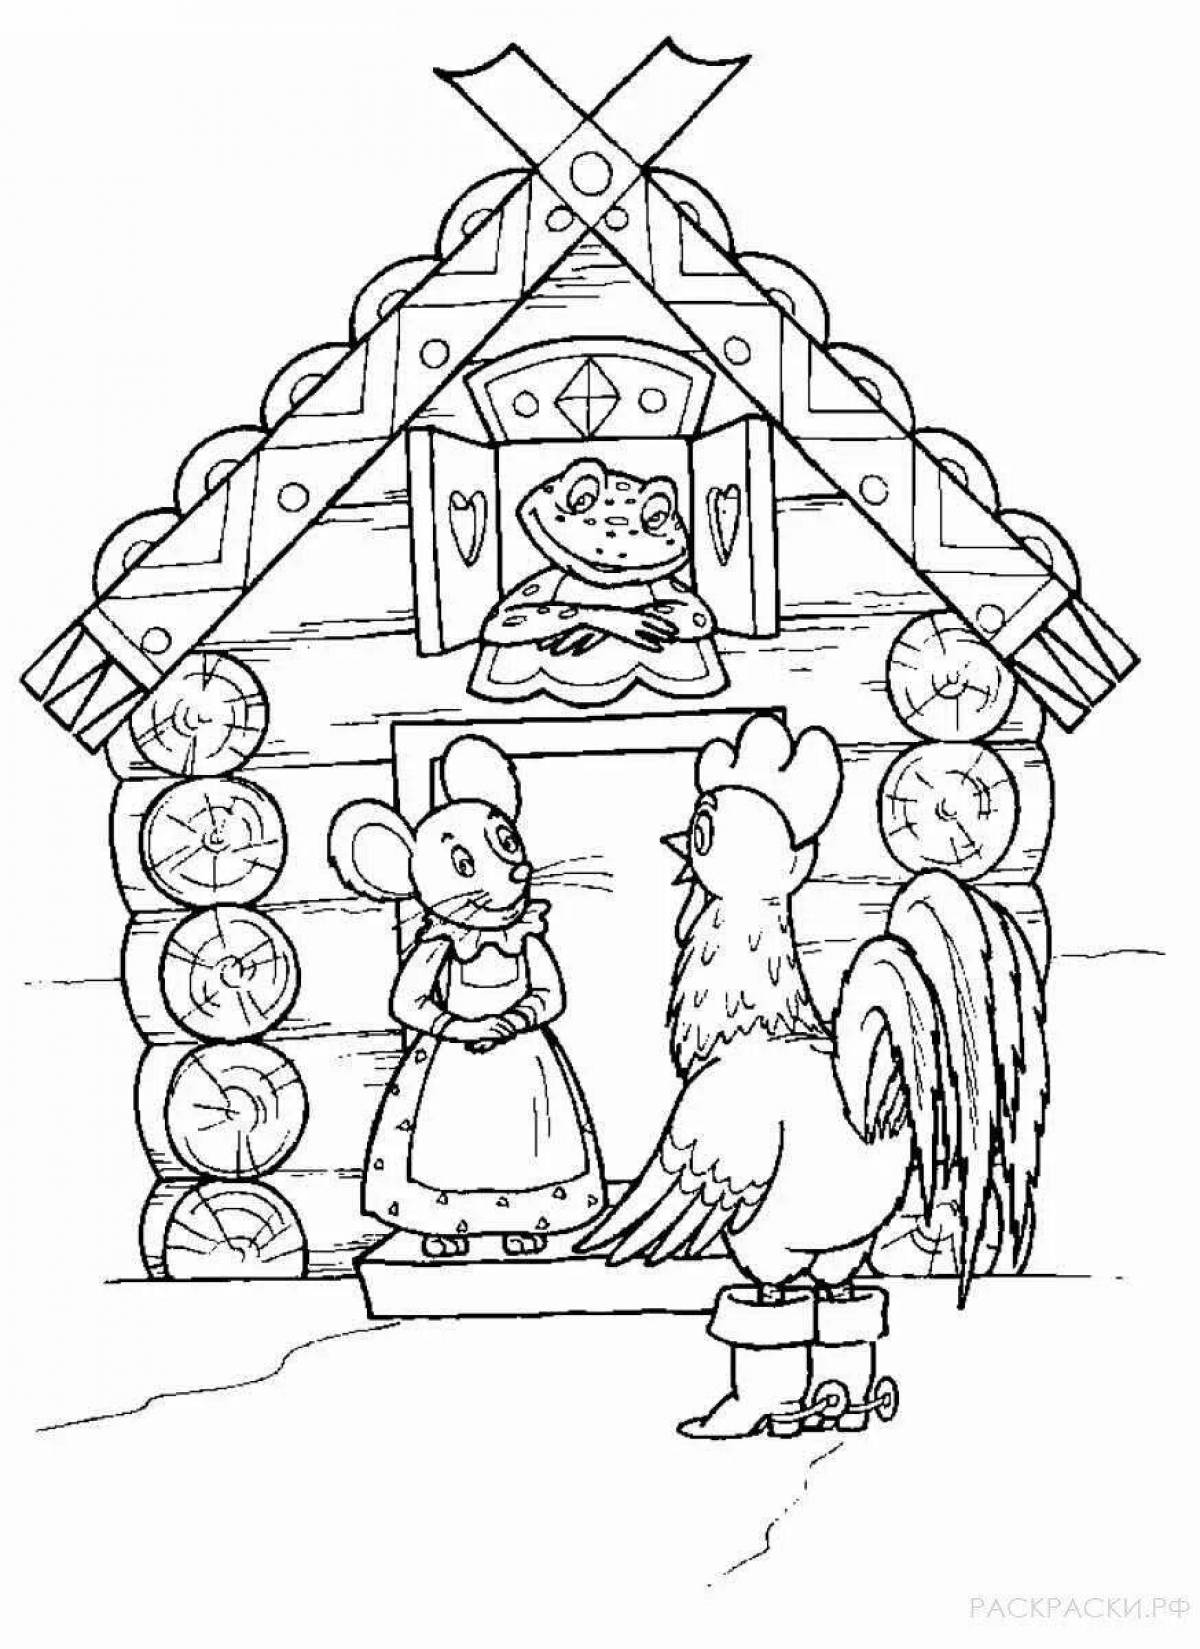 Inviting coloring Russian fairy tales